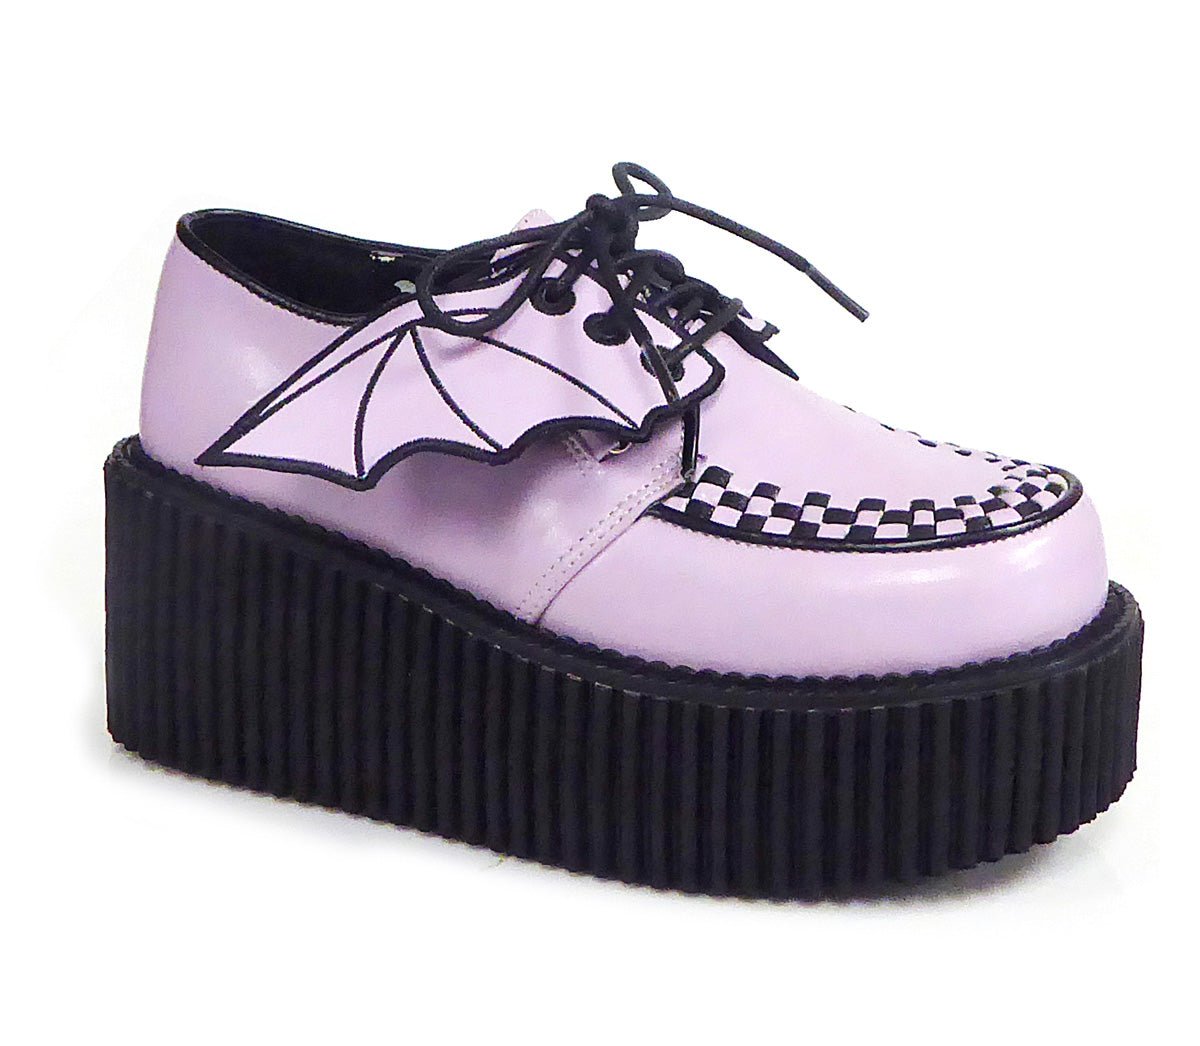 Clearance DemoniaCult Creeper 205 Lavender Size 3UK/6USA